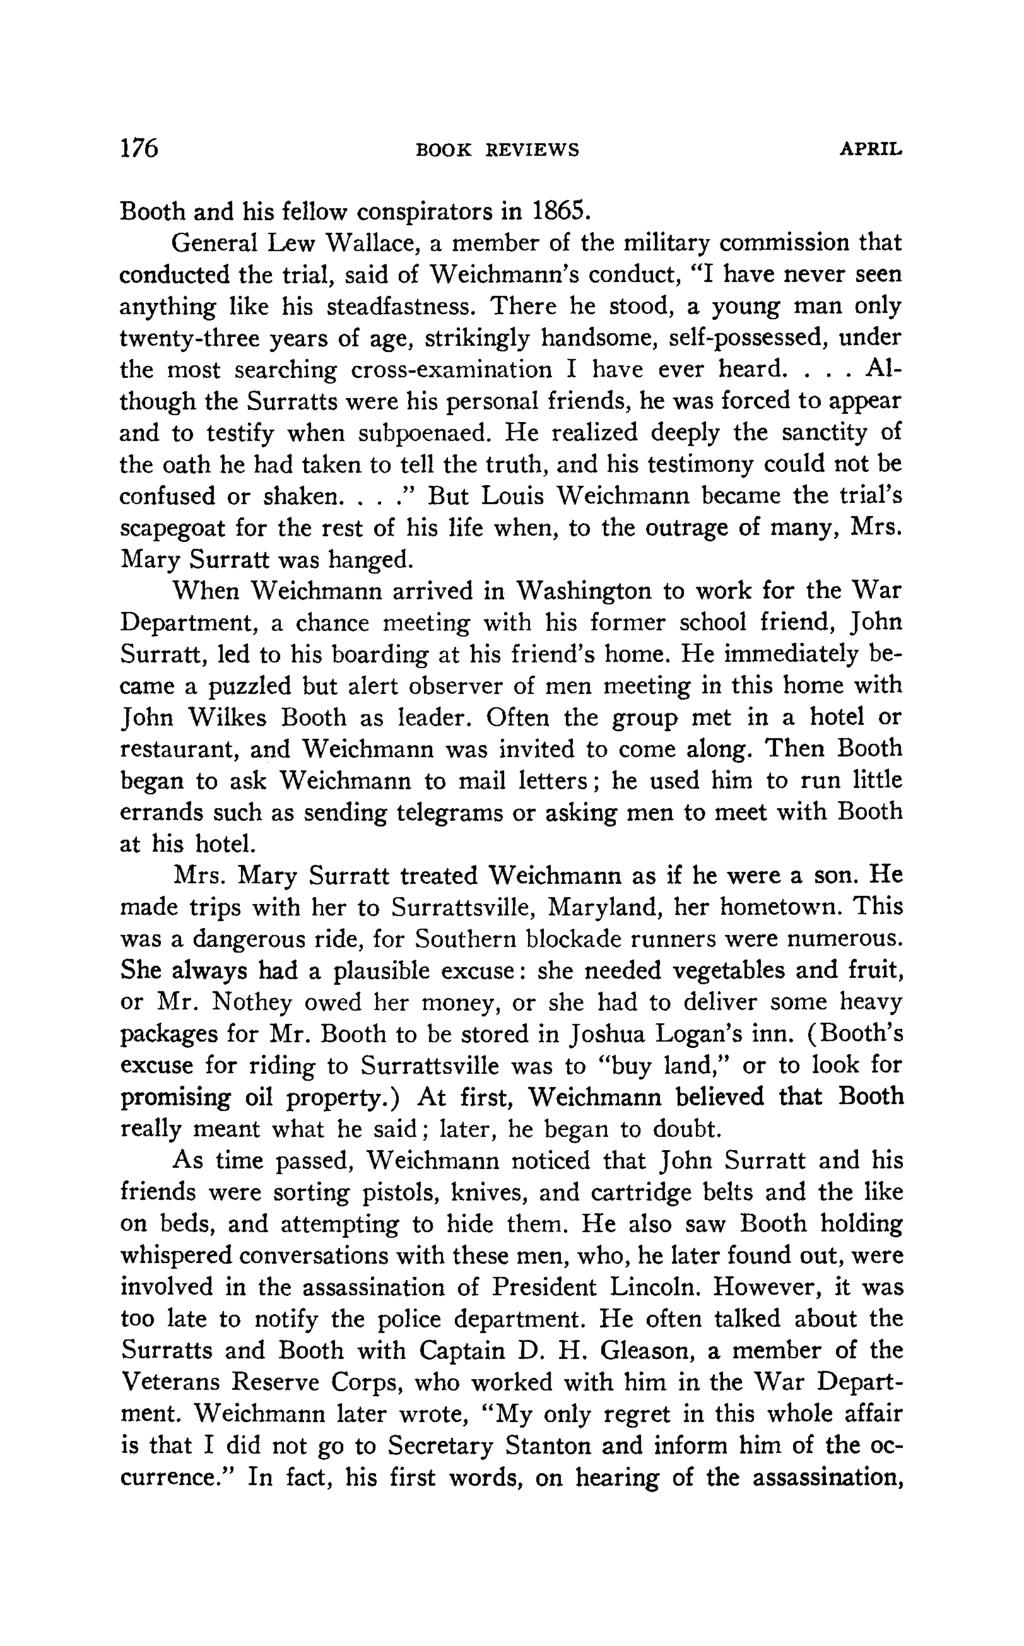 BOOK REVIEWS APRIL 176 Booth and his fellow conspirators in 1865.